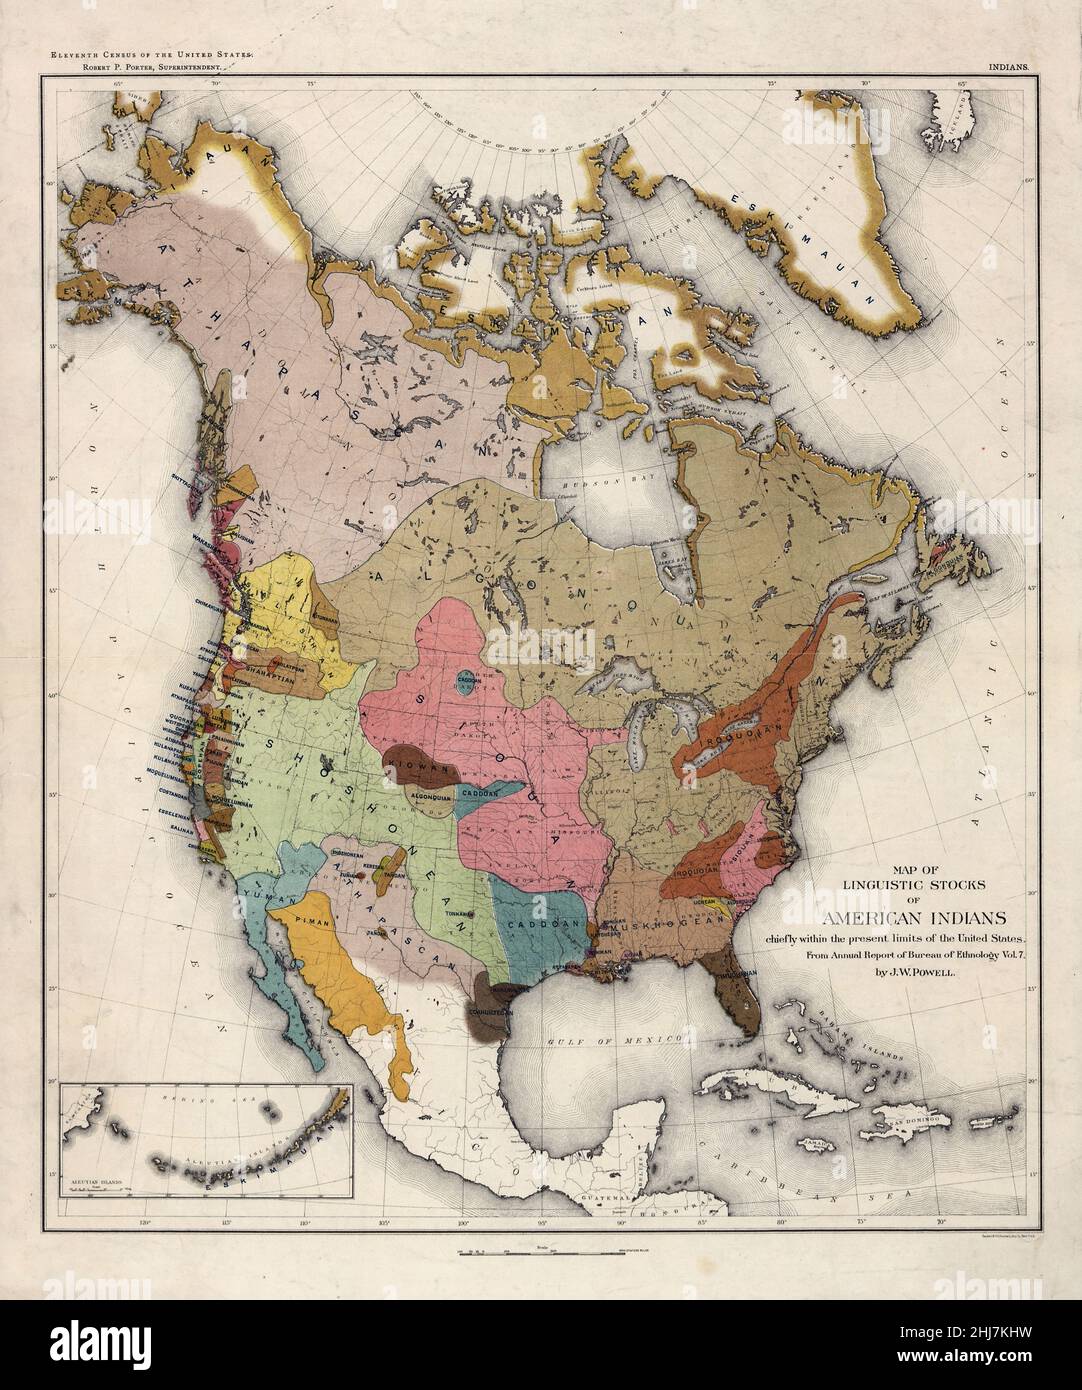 Map of linguistic stocks of American Indians., 1890. Created by Powell, John Wesley, 1834-1902. Stock Photo